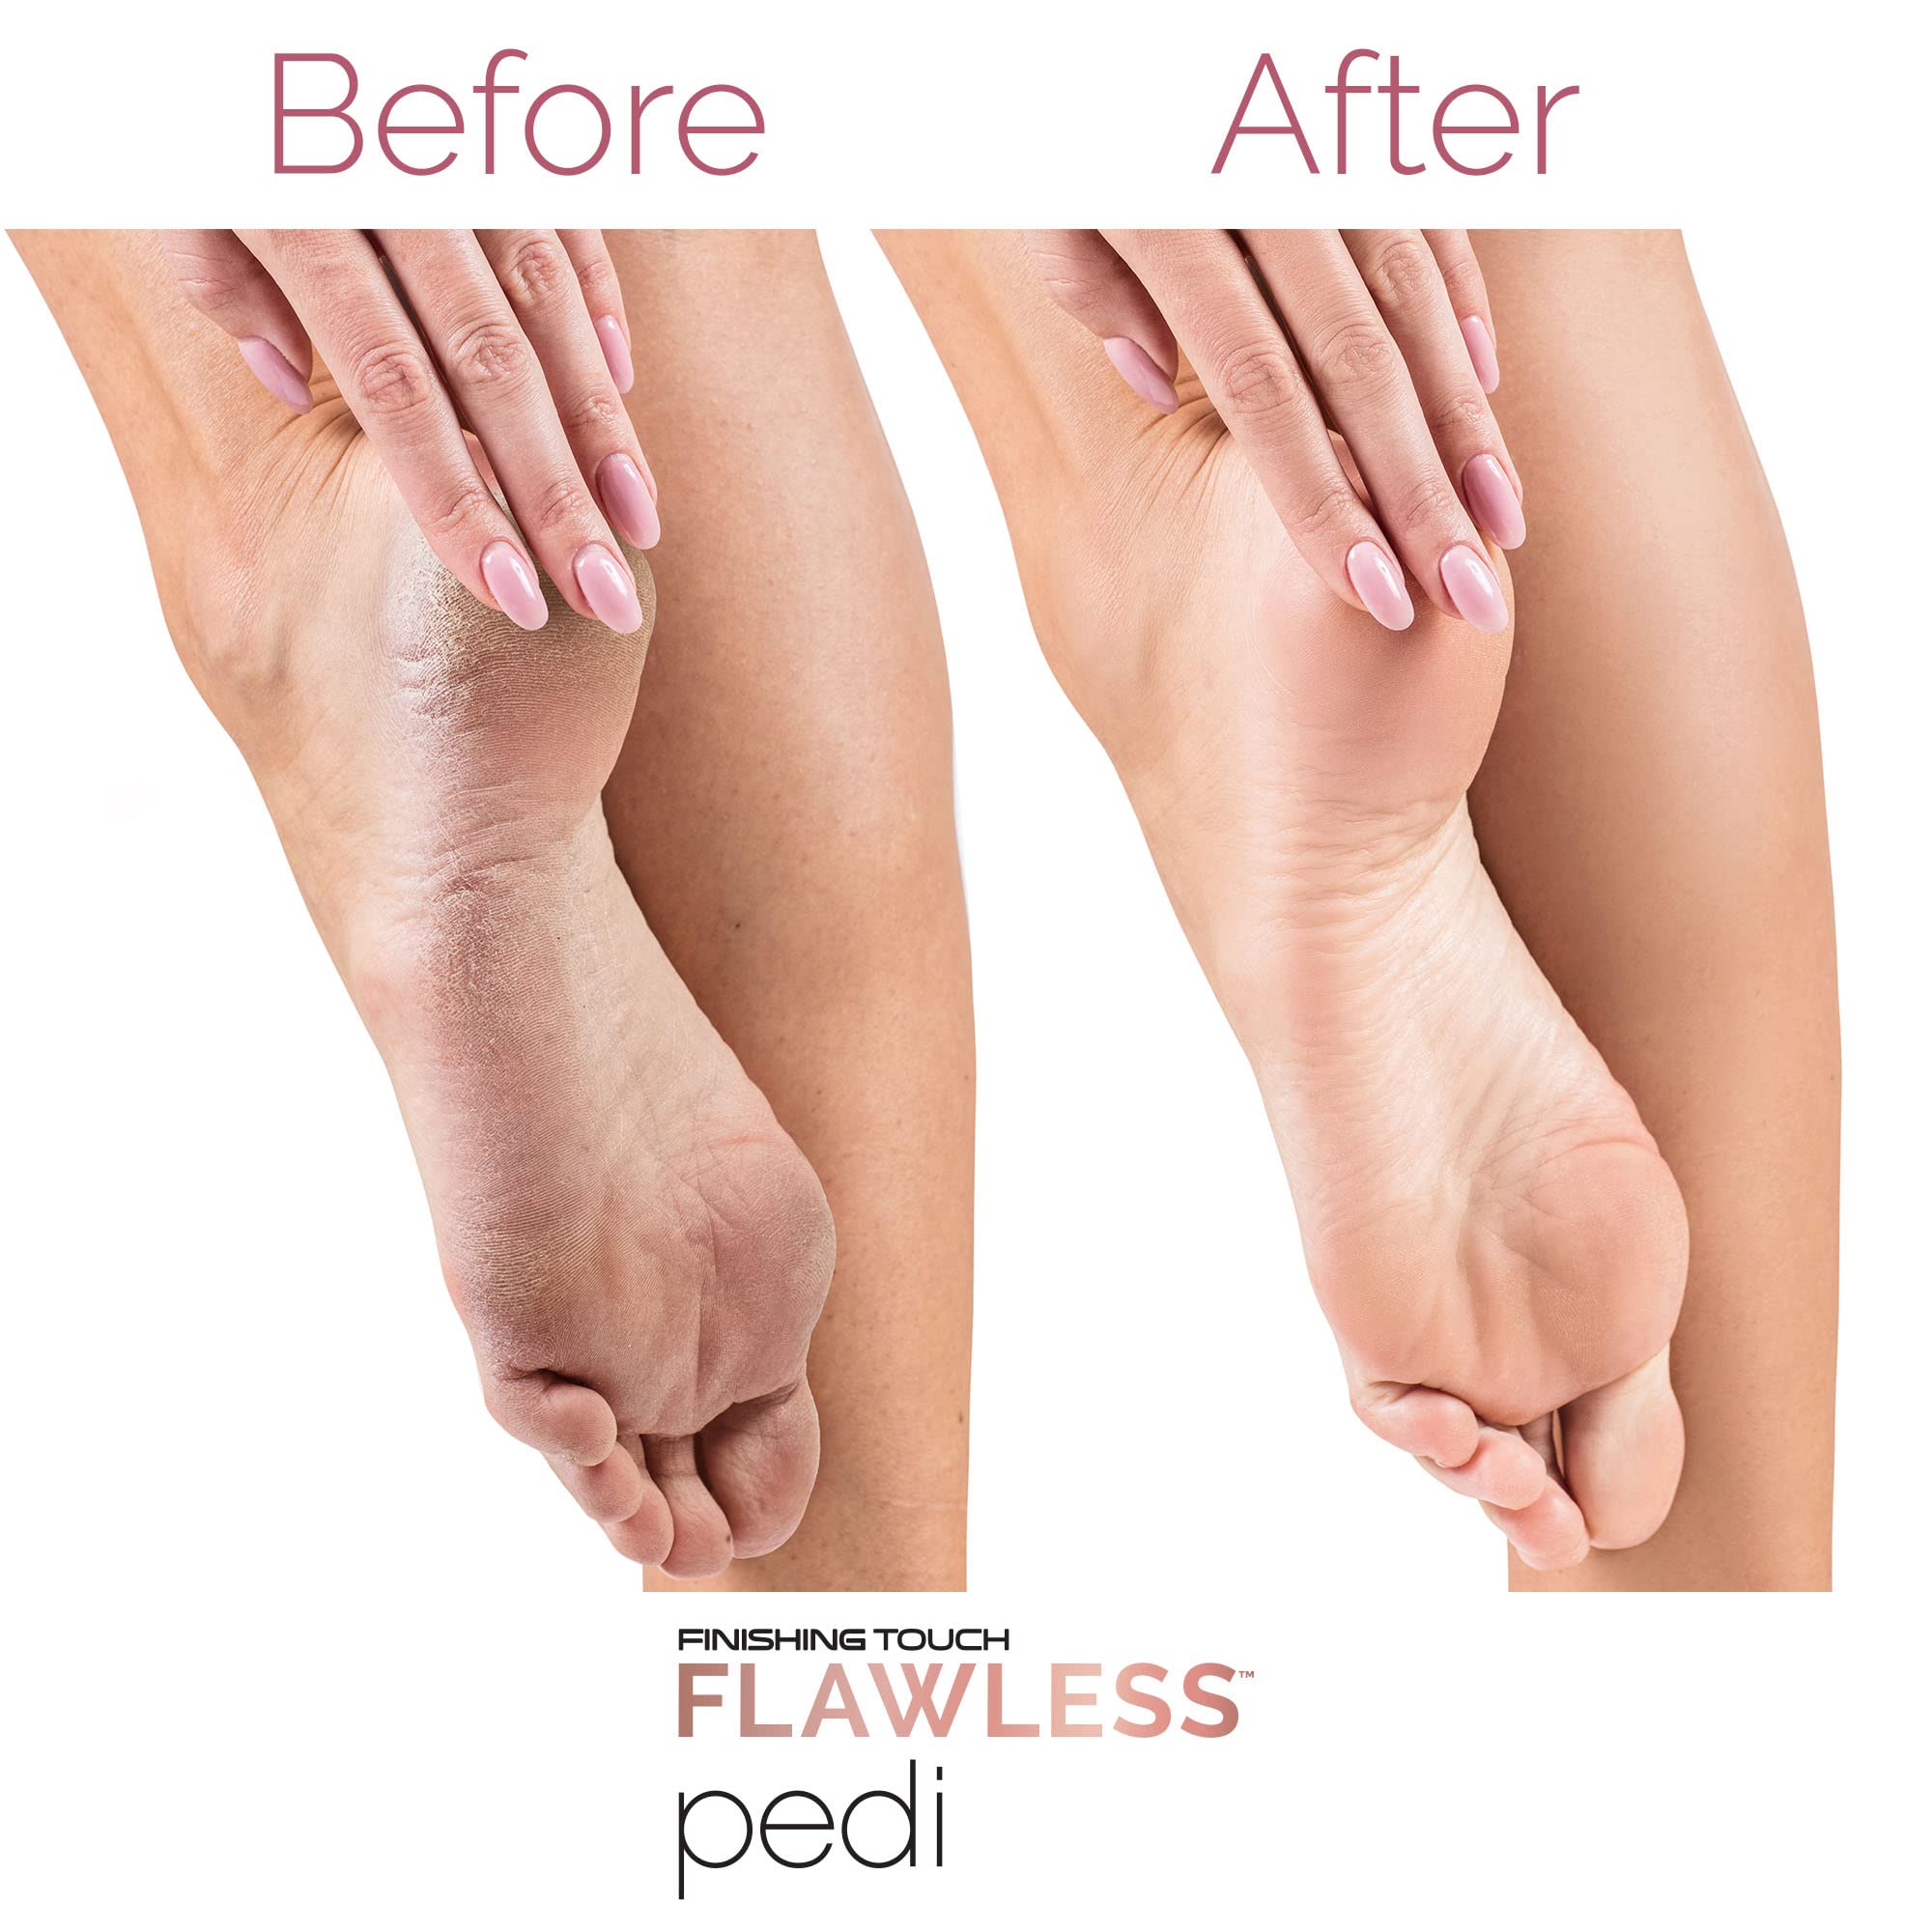 Finishing Touch Flawless Pedi Electronic Tool File and Callus Remover, Pedicure-New Version (Amazon Exclusive)